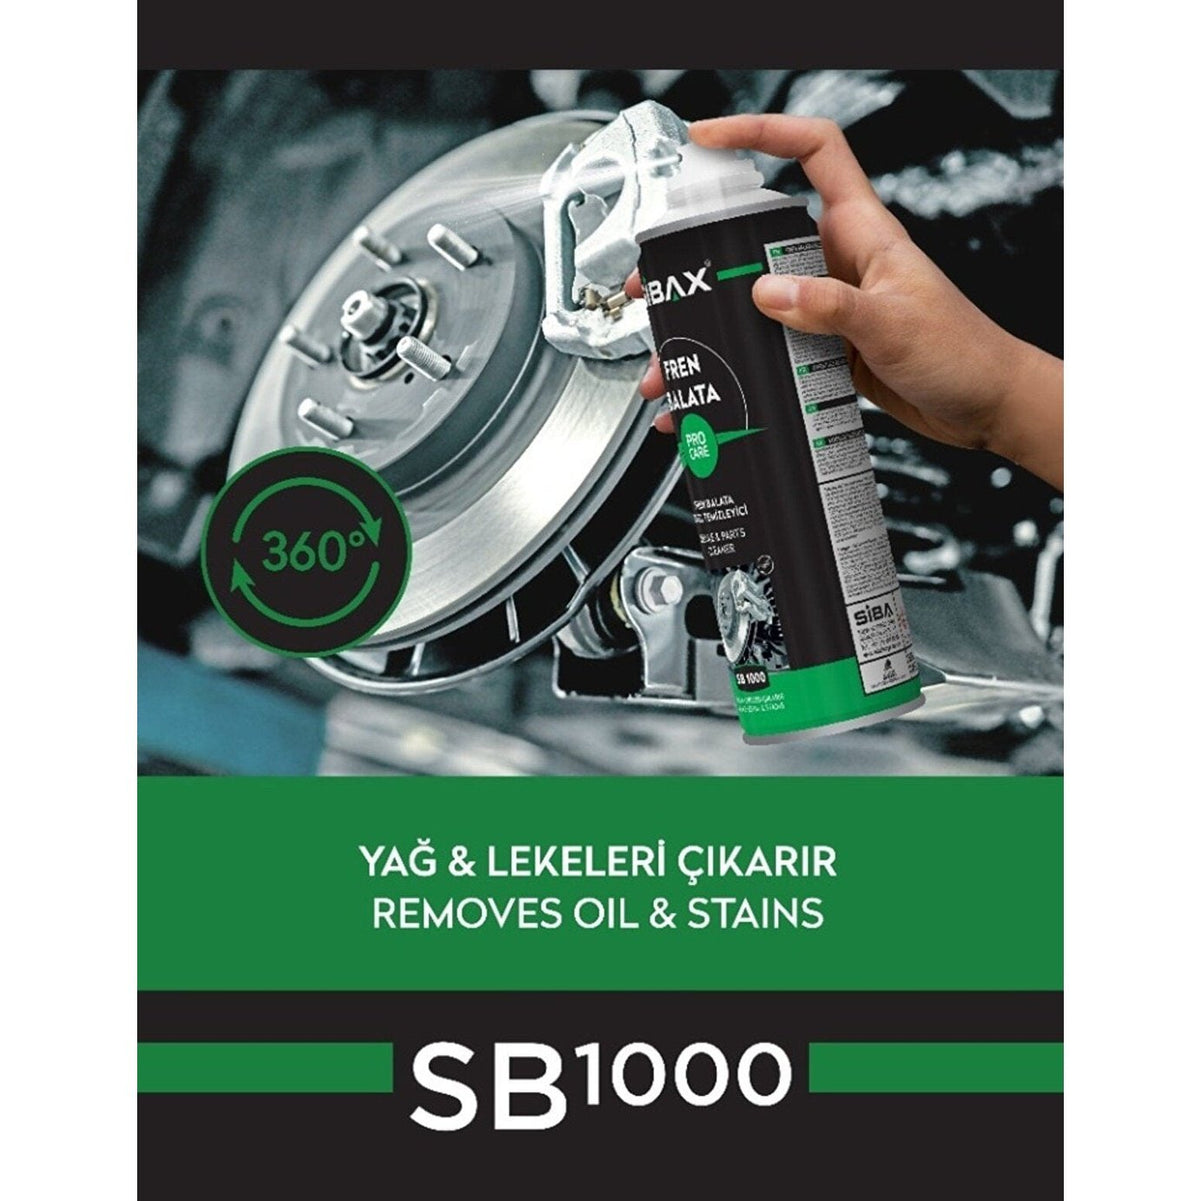 Buy Sibax Brake & Parts Cleaner 500ml - SB1000 | Shop at Supply Master Accra, Ghana Fluids and Lubrication Buy Tools hardware Building materials